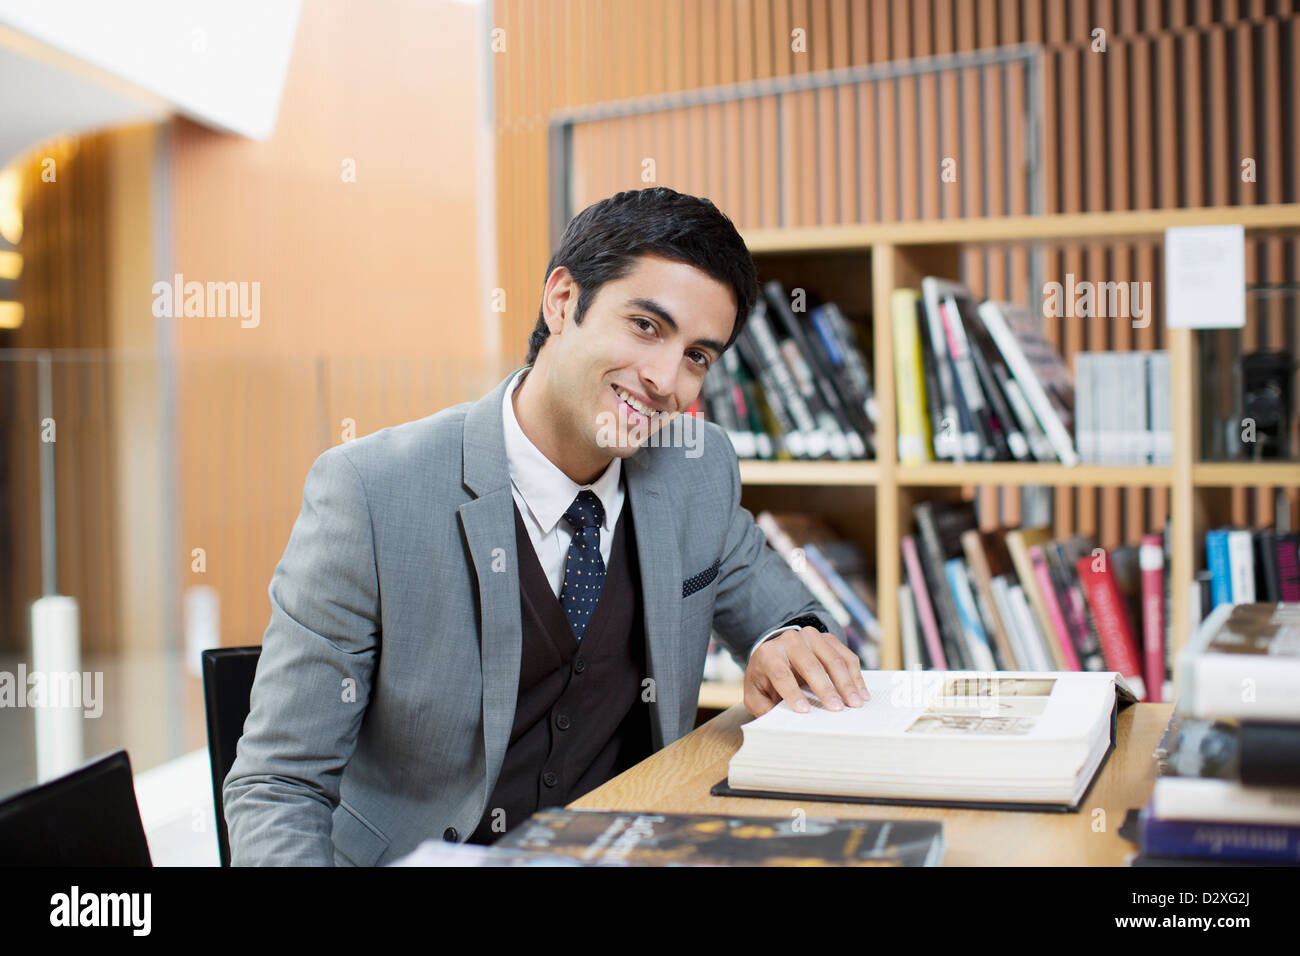 Portrait of smiling businessman reading book in library Banque D'Images